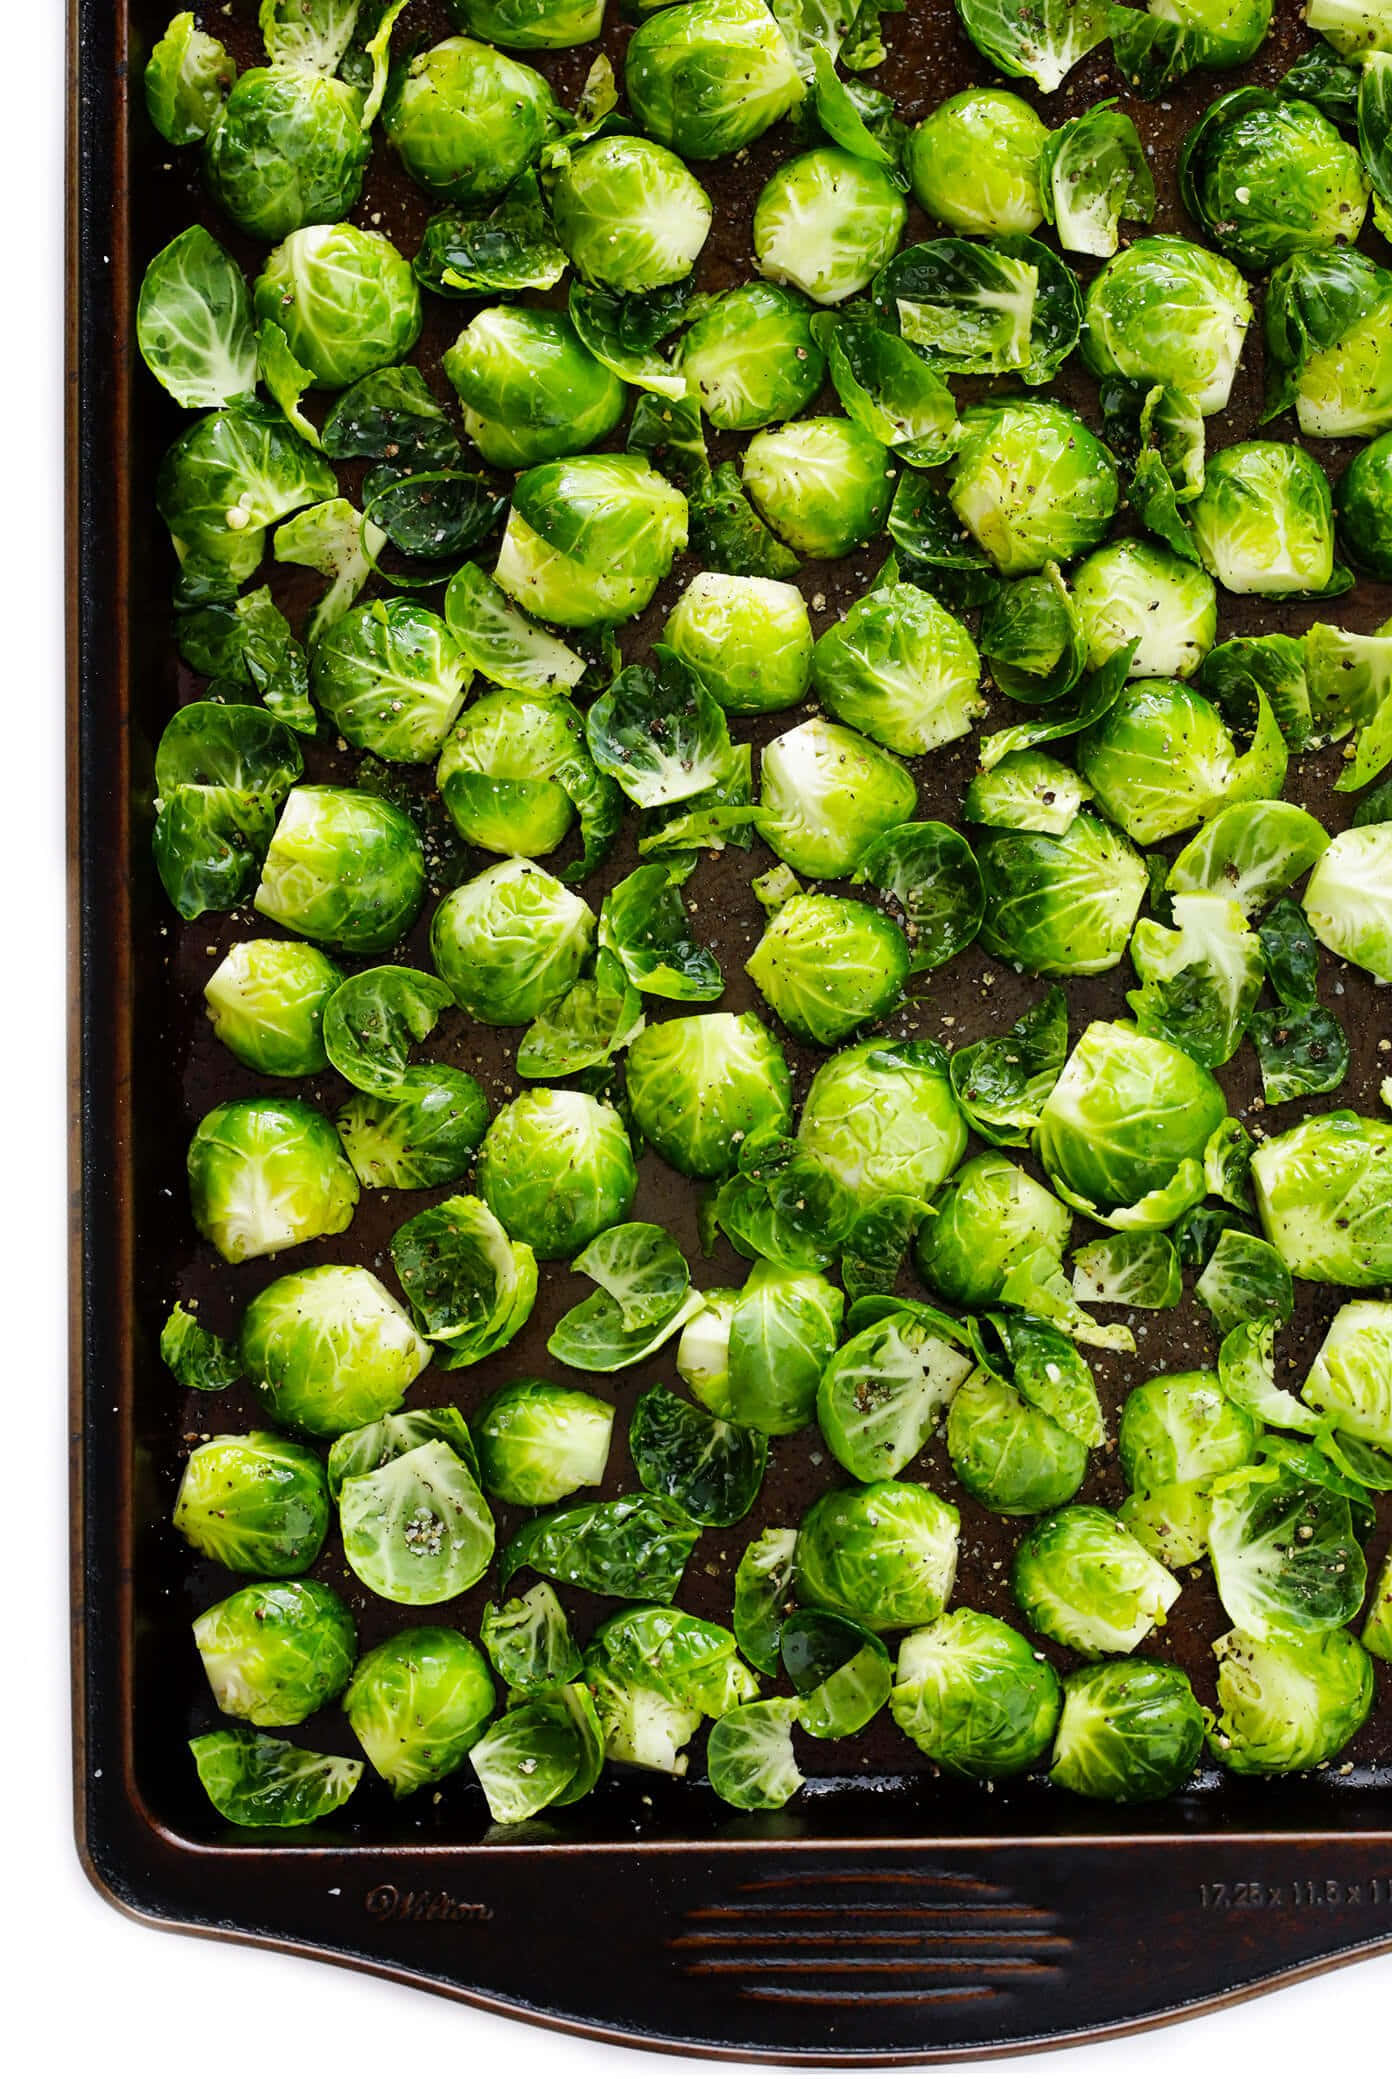 A Baking Sheet With Brussel Sprouts On It